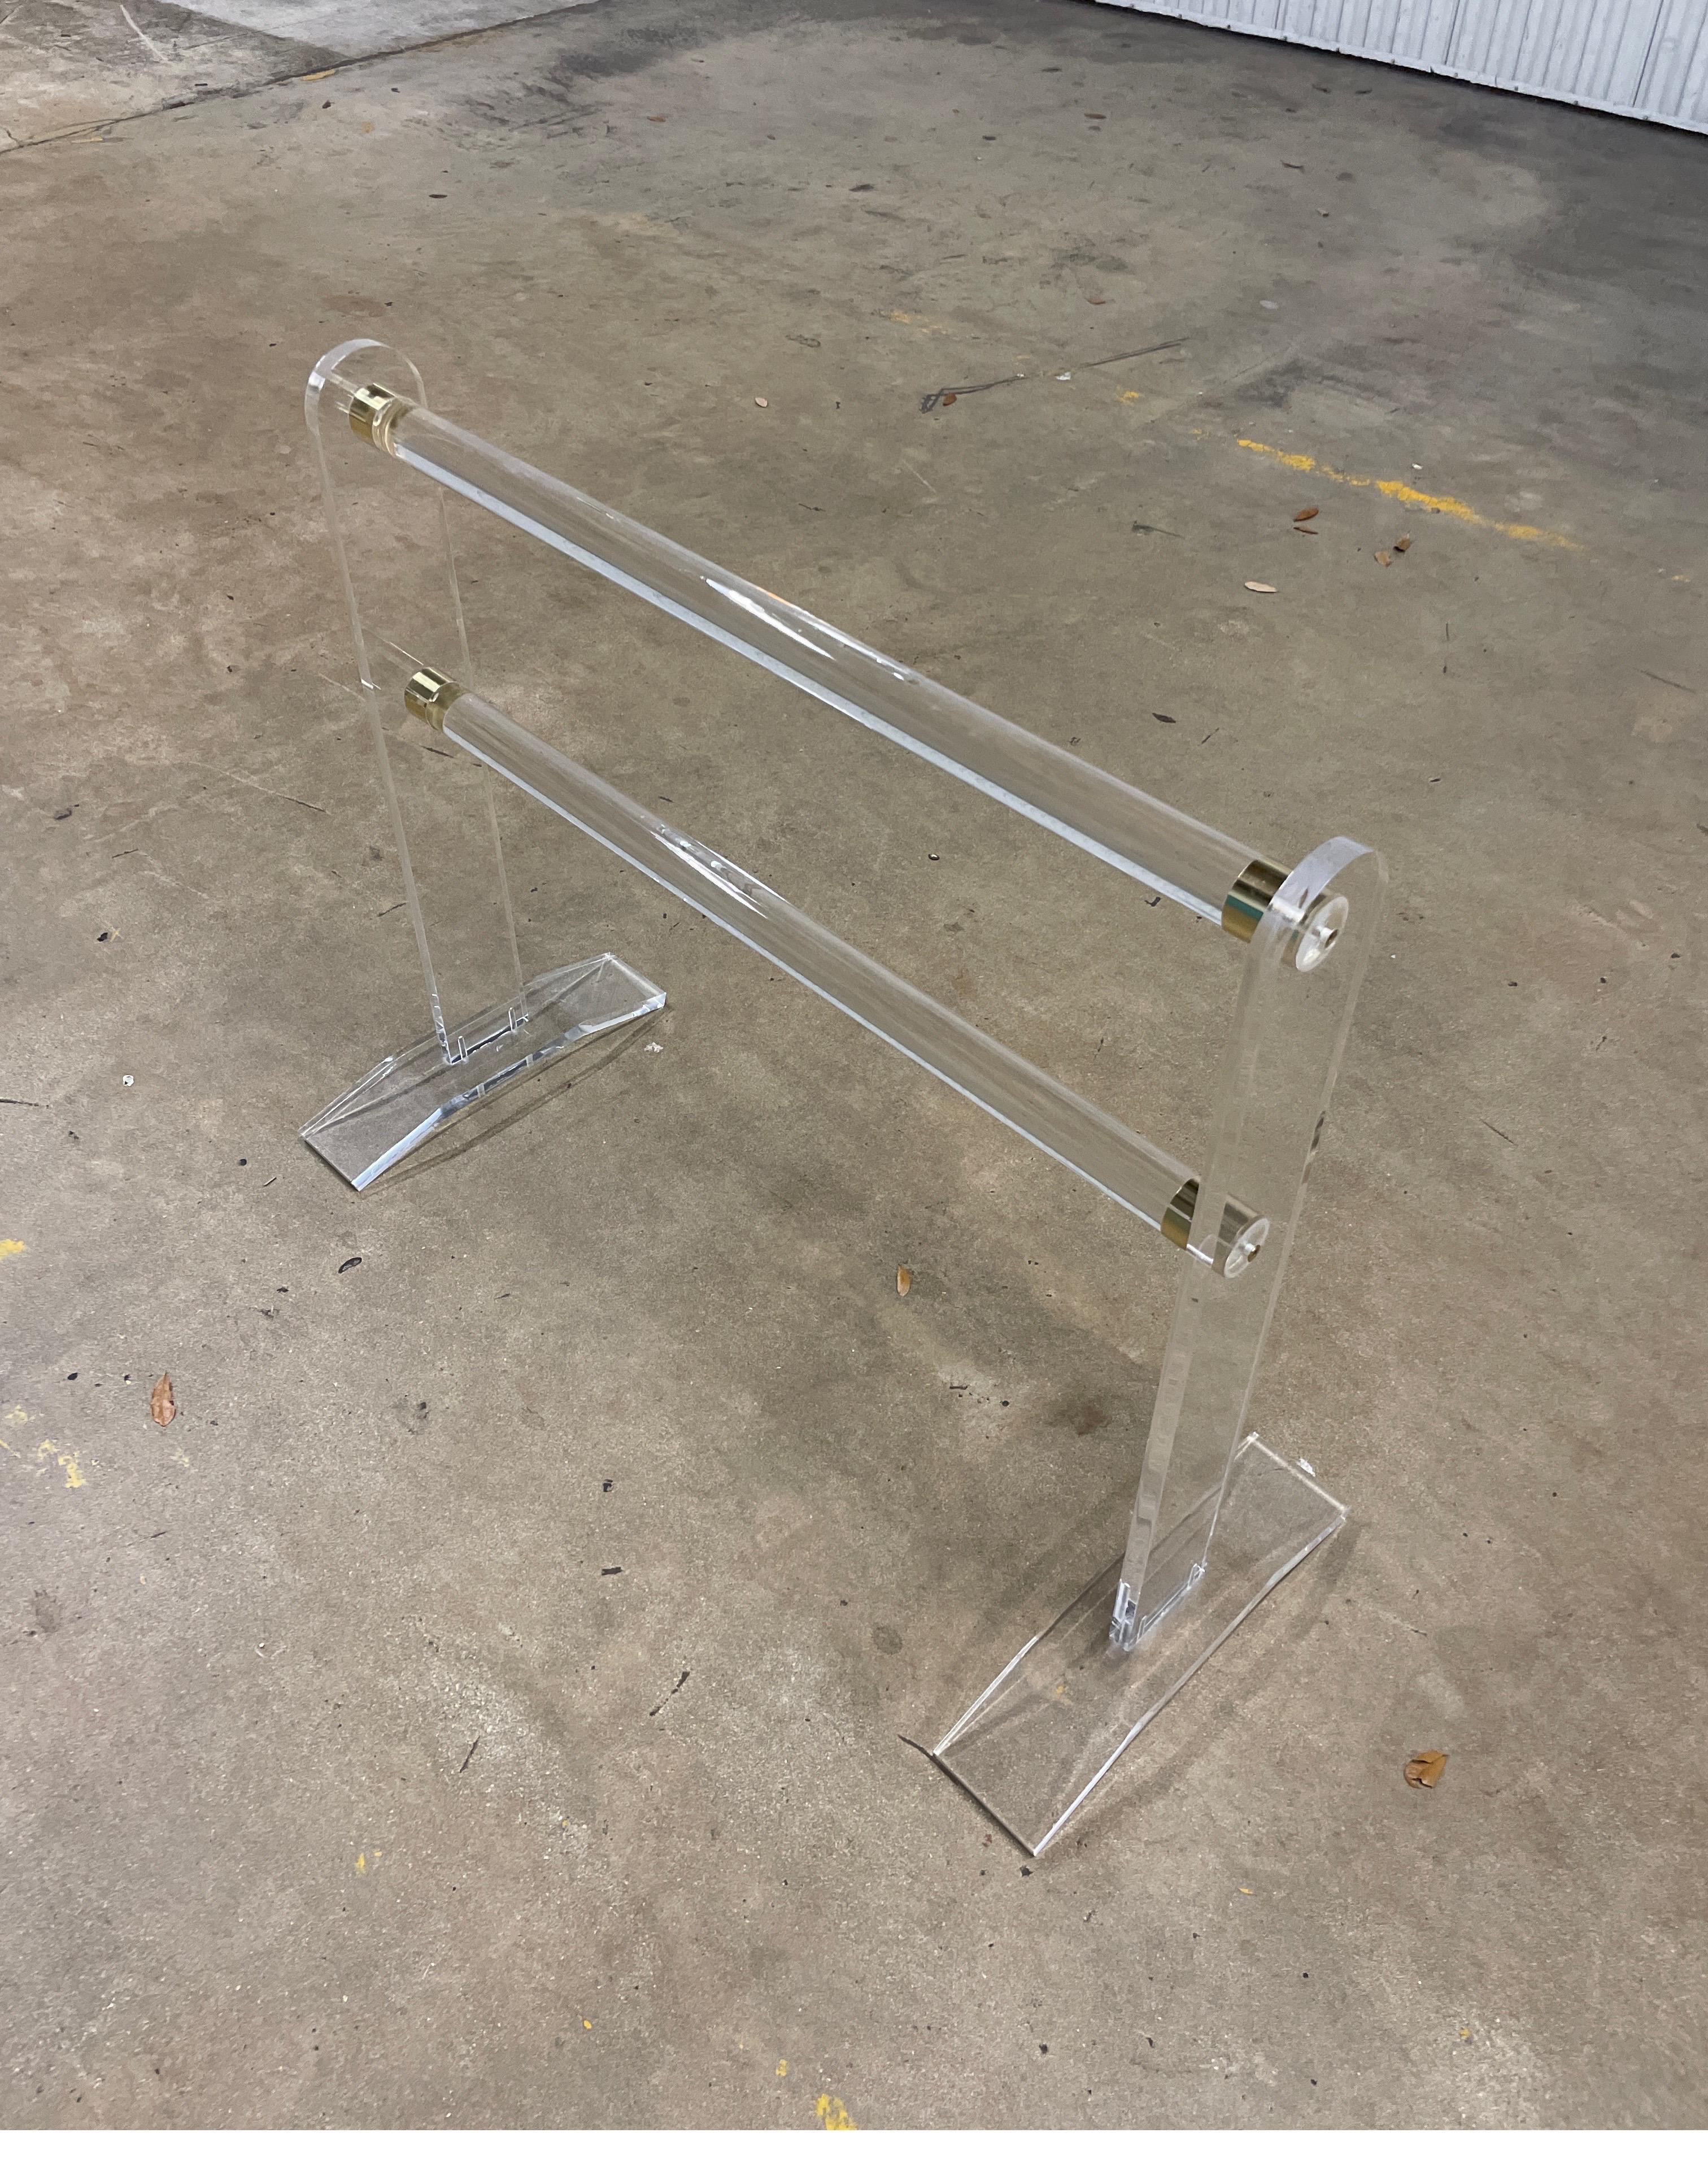 Vintage sleek heavy lucite bedspread / quilt rack. Great invisible piece to hold your bedcovers. Very sturdy and in good condition.